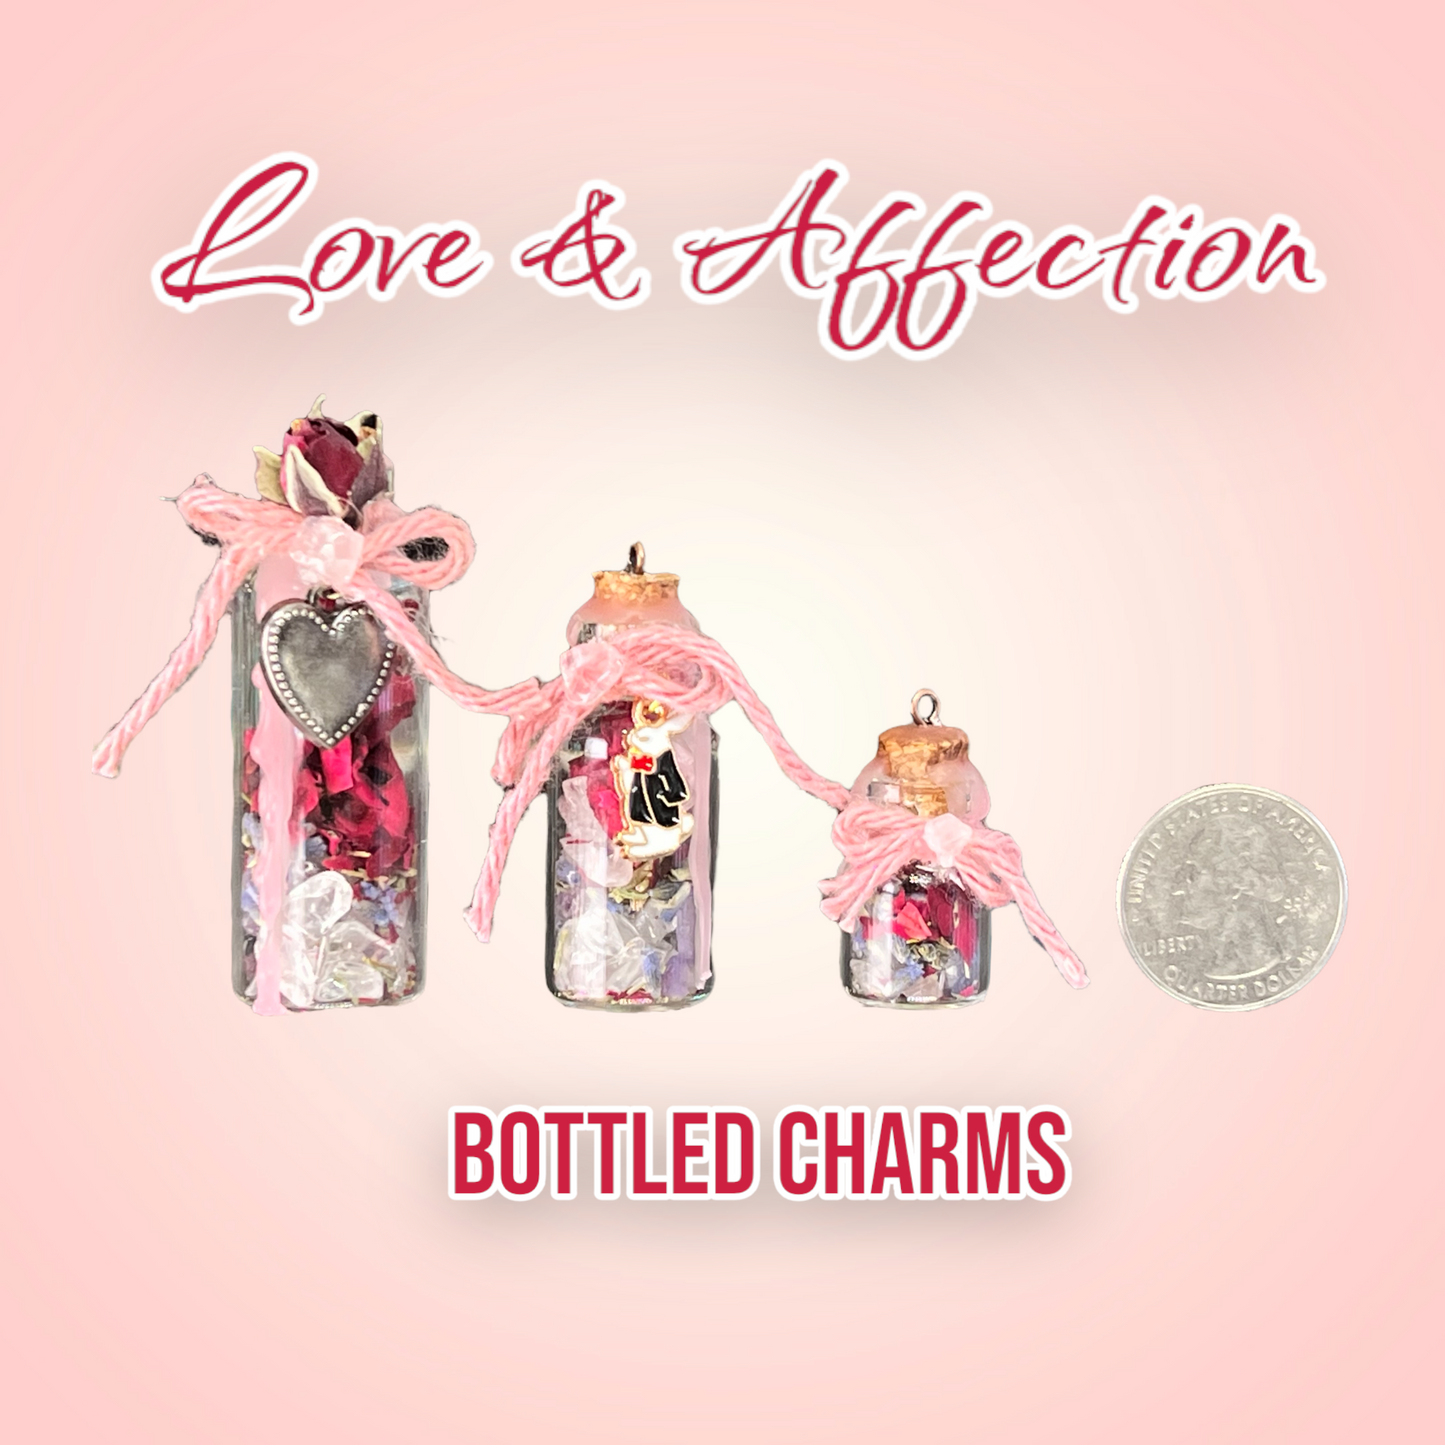 Love & Affection Bottled Charms